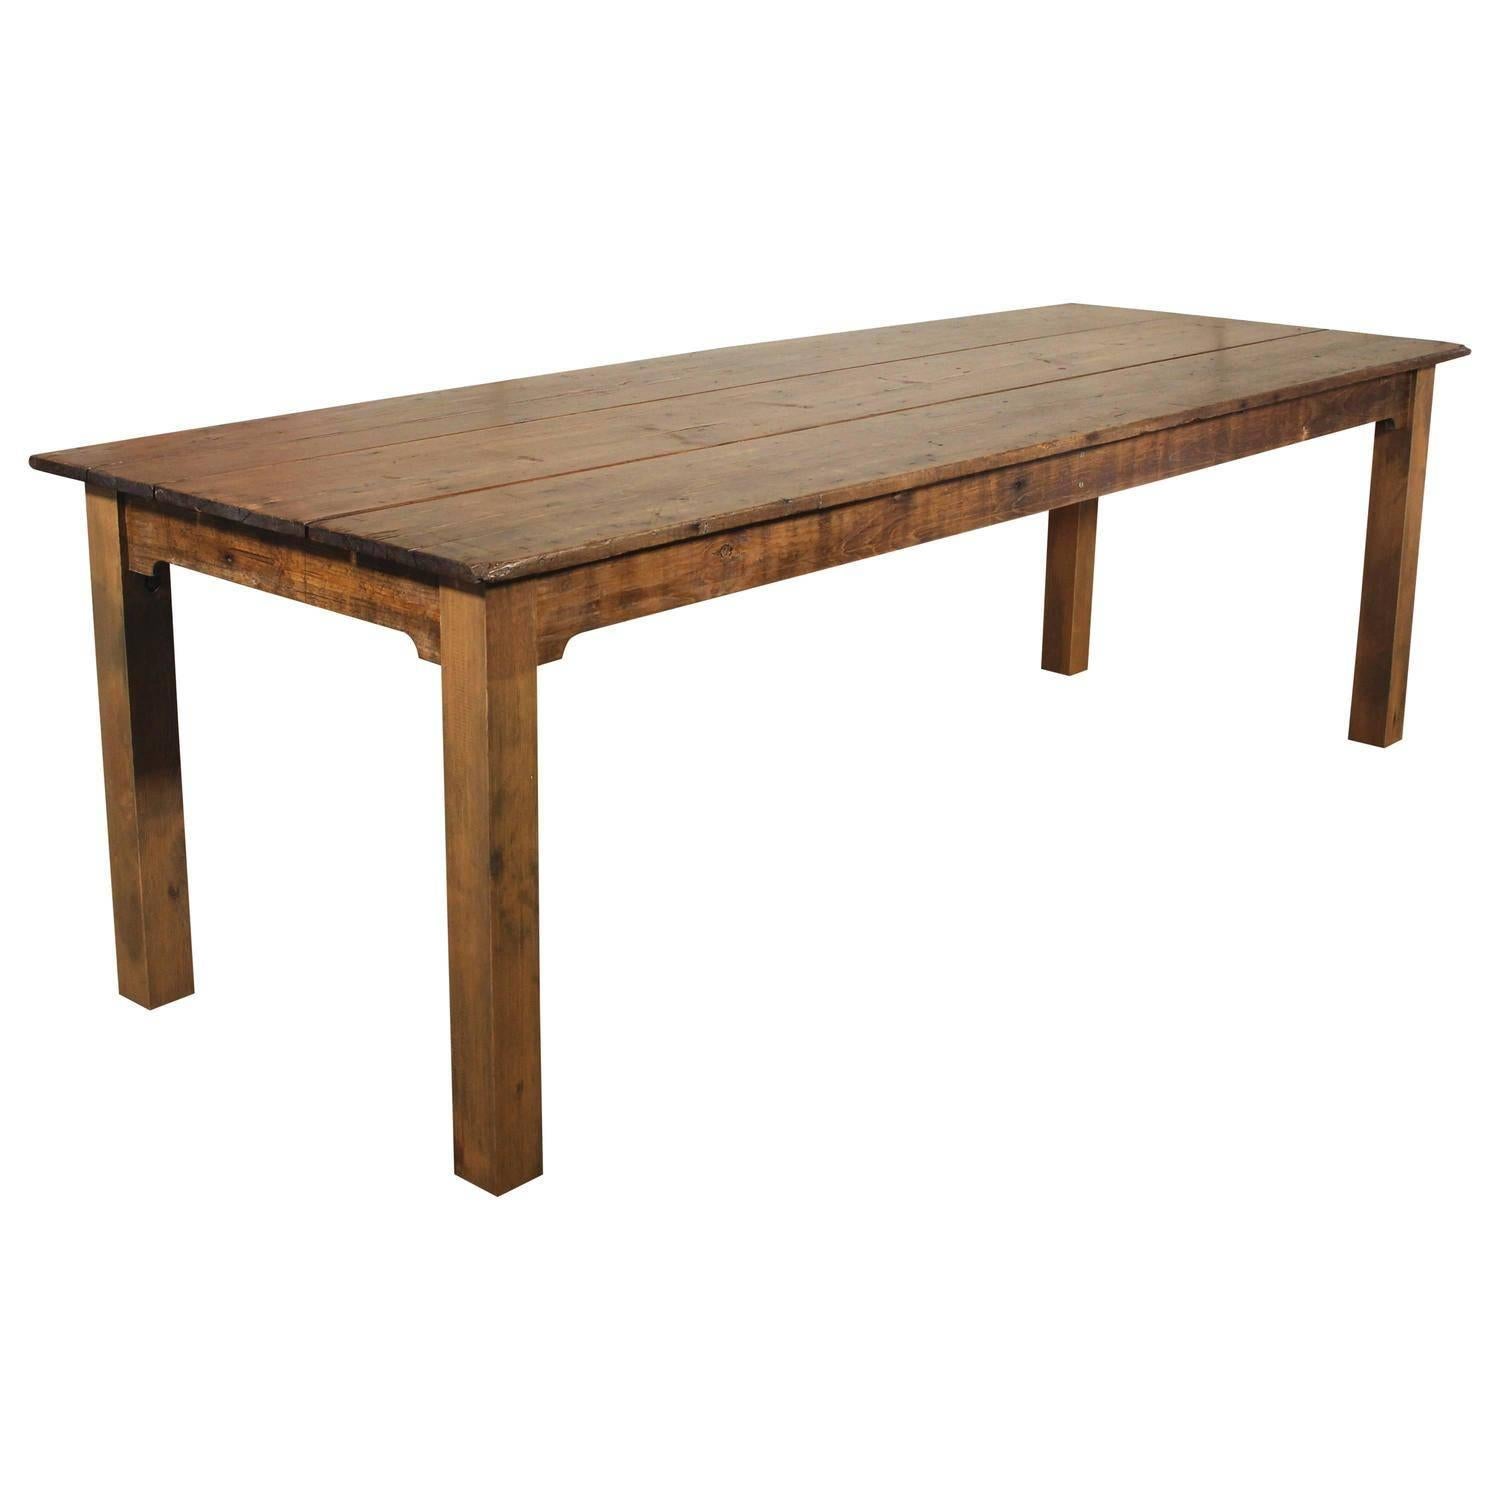 Farm Table - Reclaimed Wood Tobacco Sorting Dining Harvest Conference